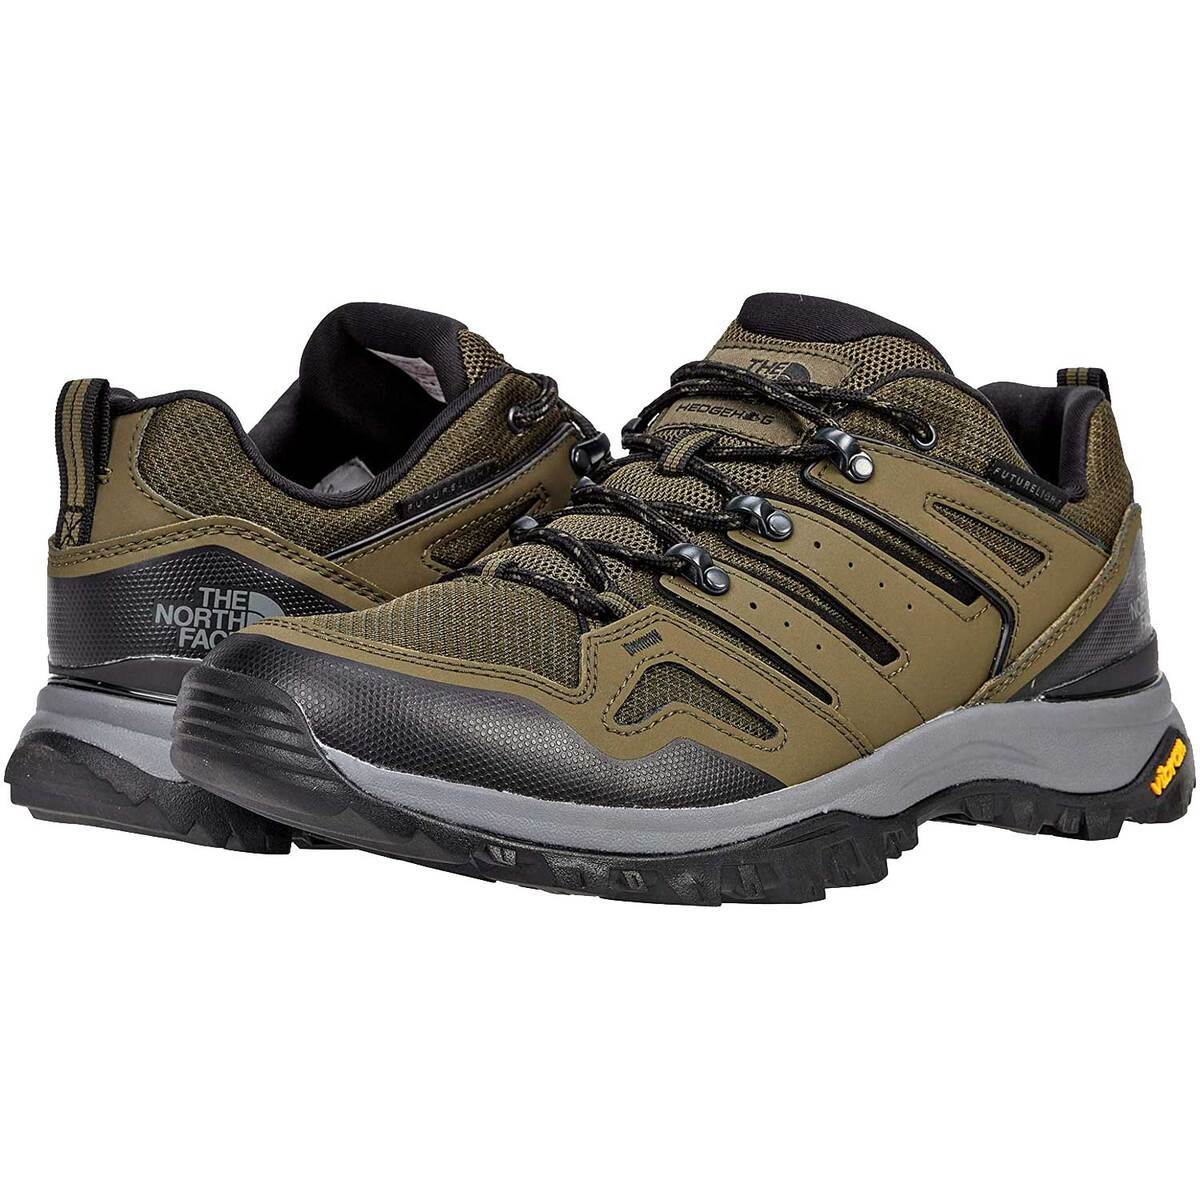 The North Face Men's Hedgehog Futurelight Waterproof Low Shoes - New Taupe Green/TNF - Size - New Taupe Green/TNF Black | Sportsman's Warehouse